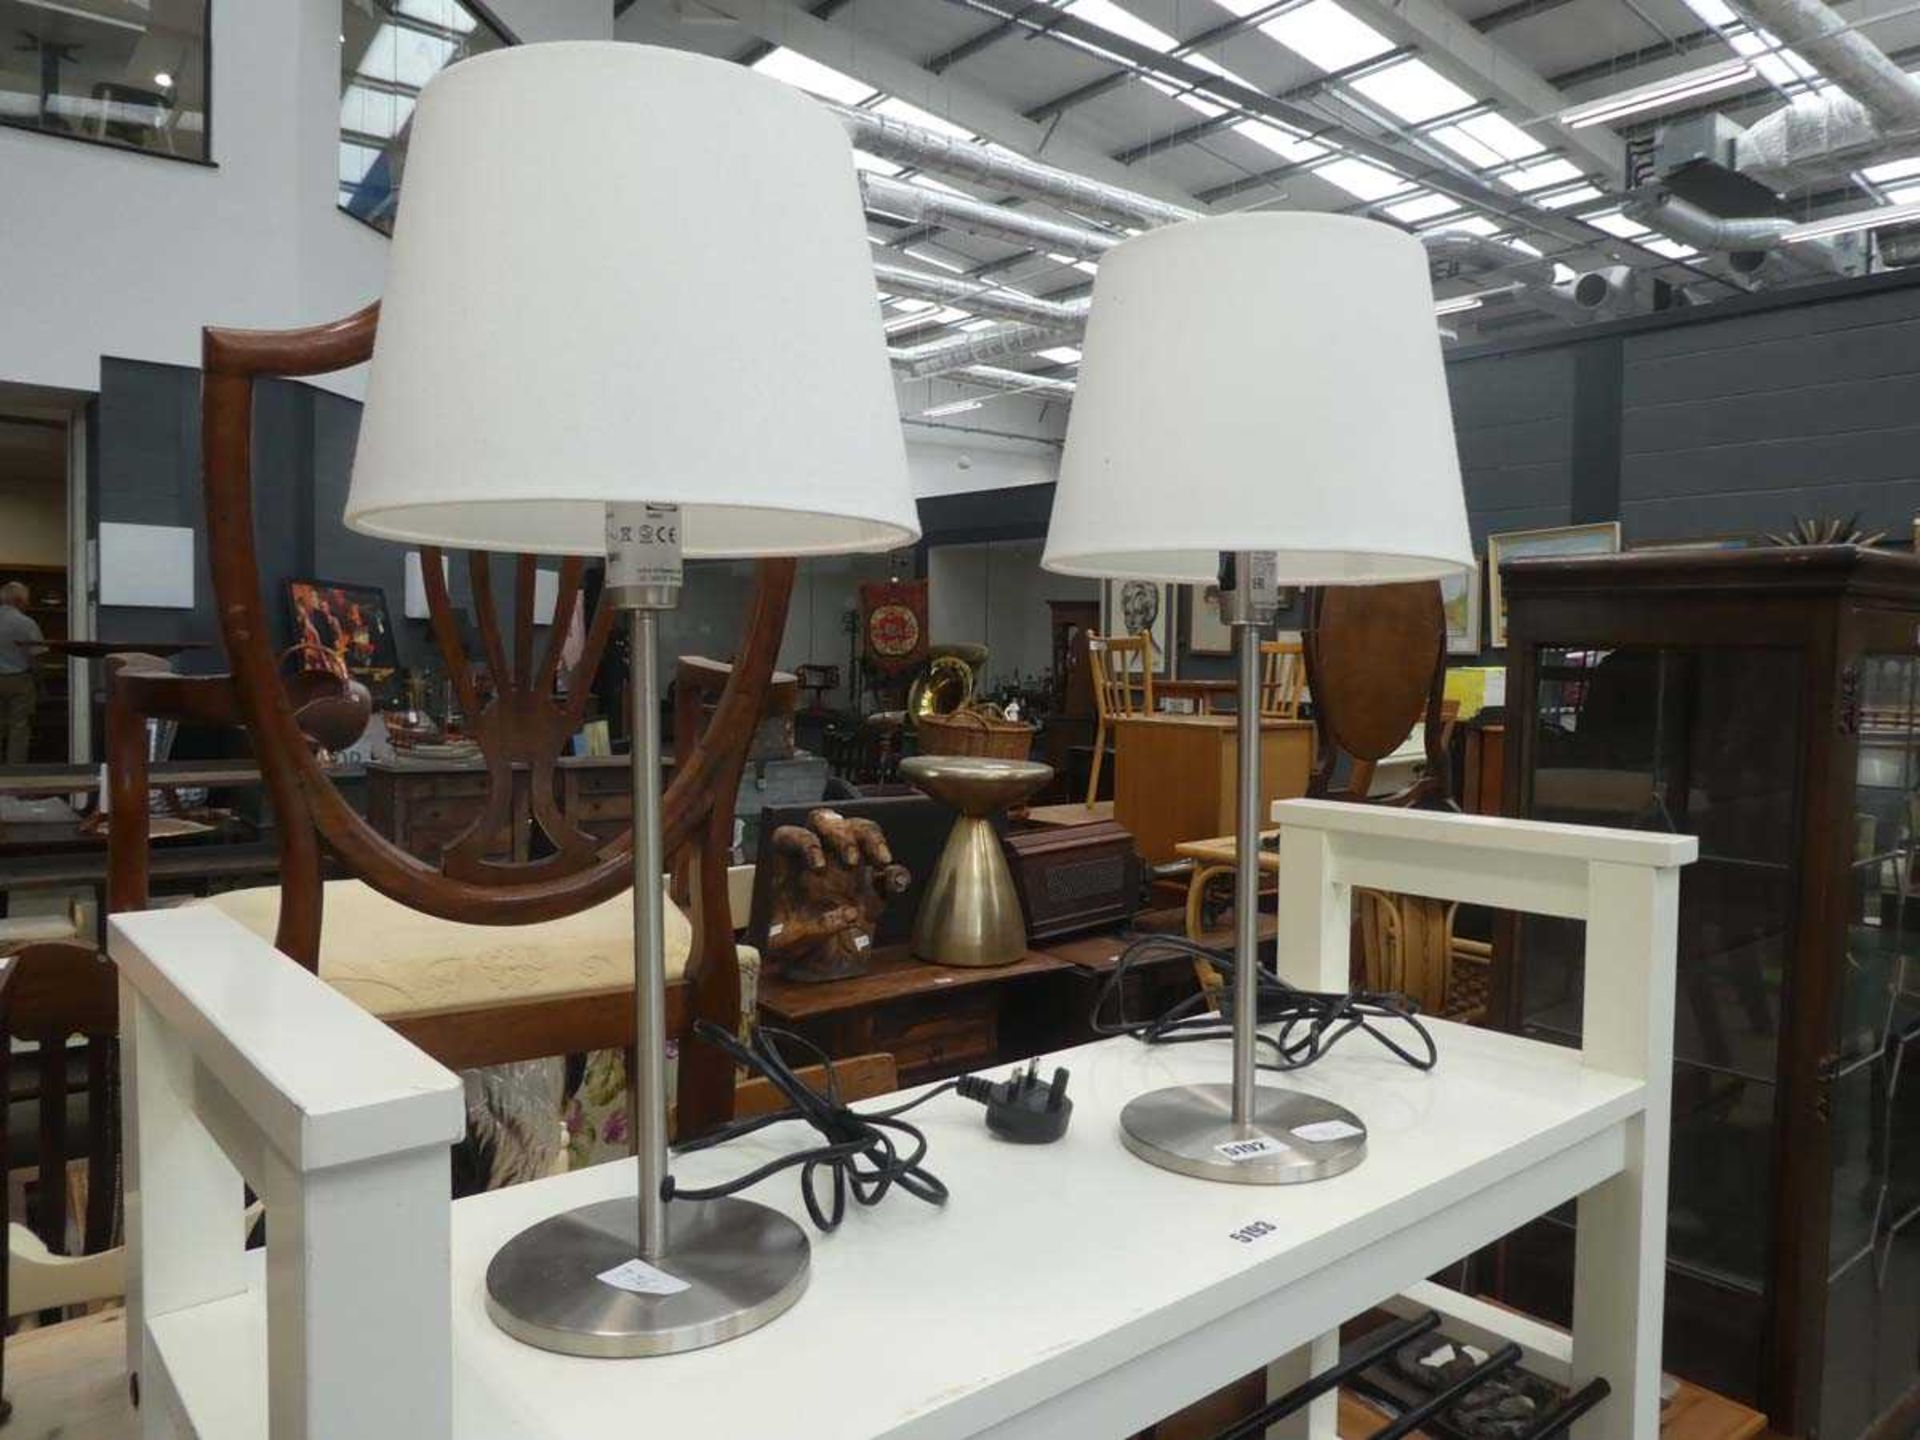 Pair of brushed metal table lamps with shades